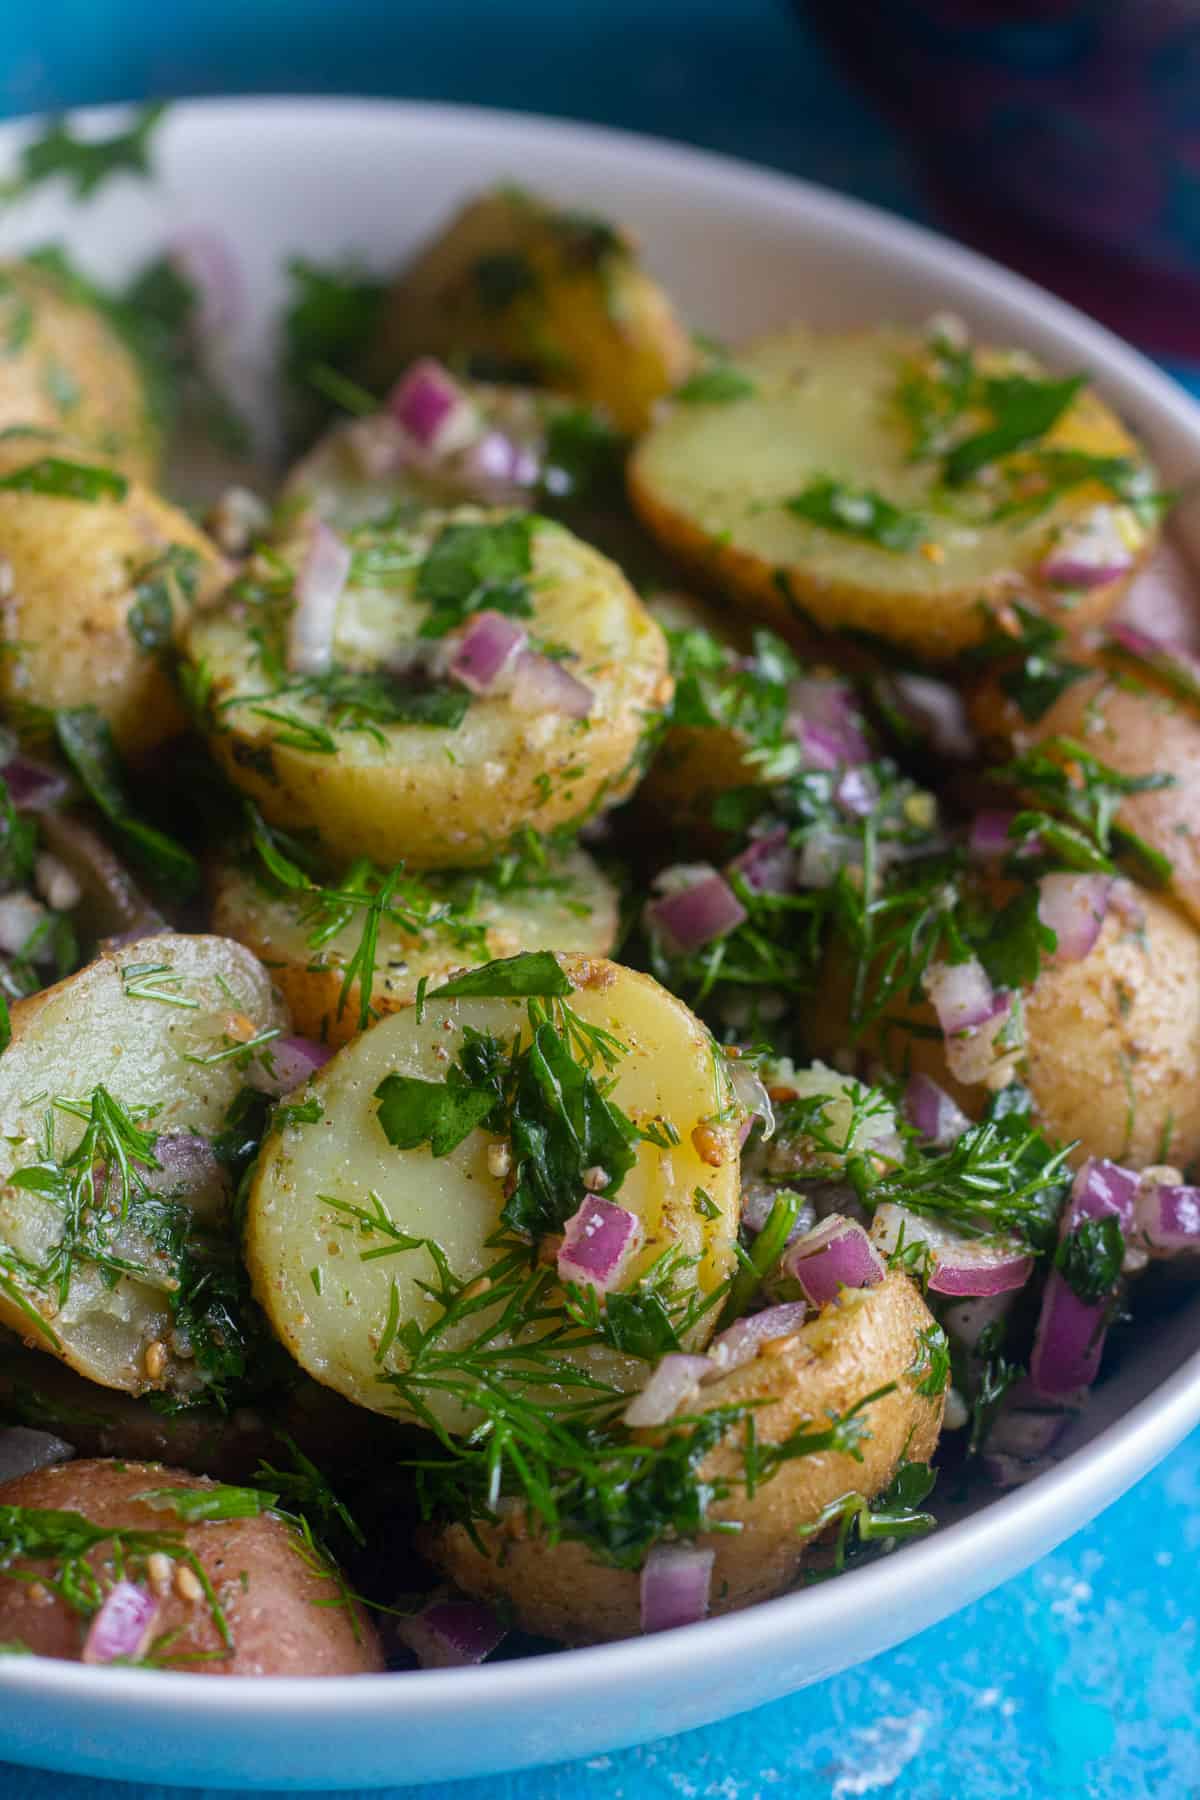 Mediterranean potato salad is so easy and simple. It's made with only a few ingredients and is packed with flavor thanks to a homemade zaatar dressing. 